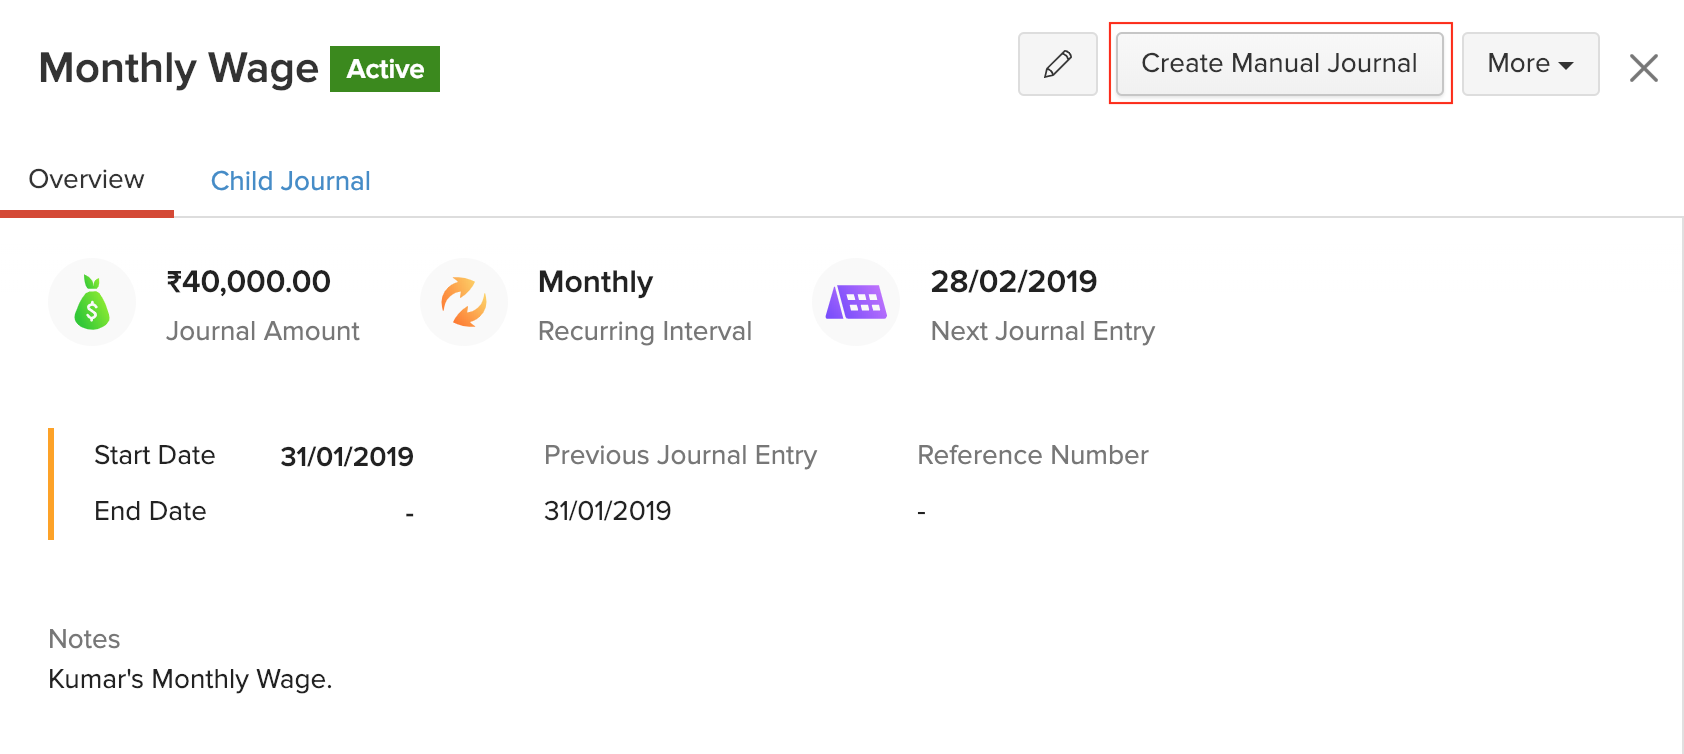 Creating Manual Journal from Recurring Journals